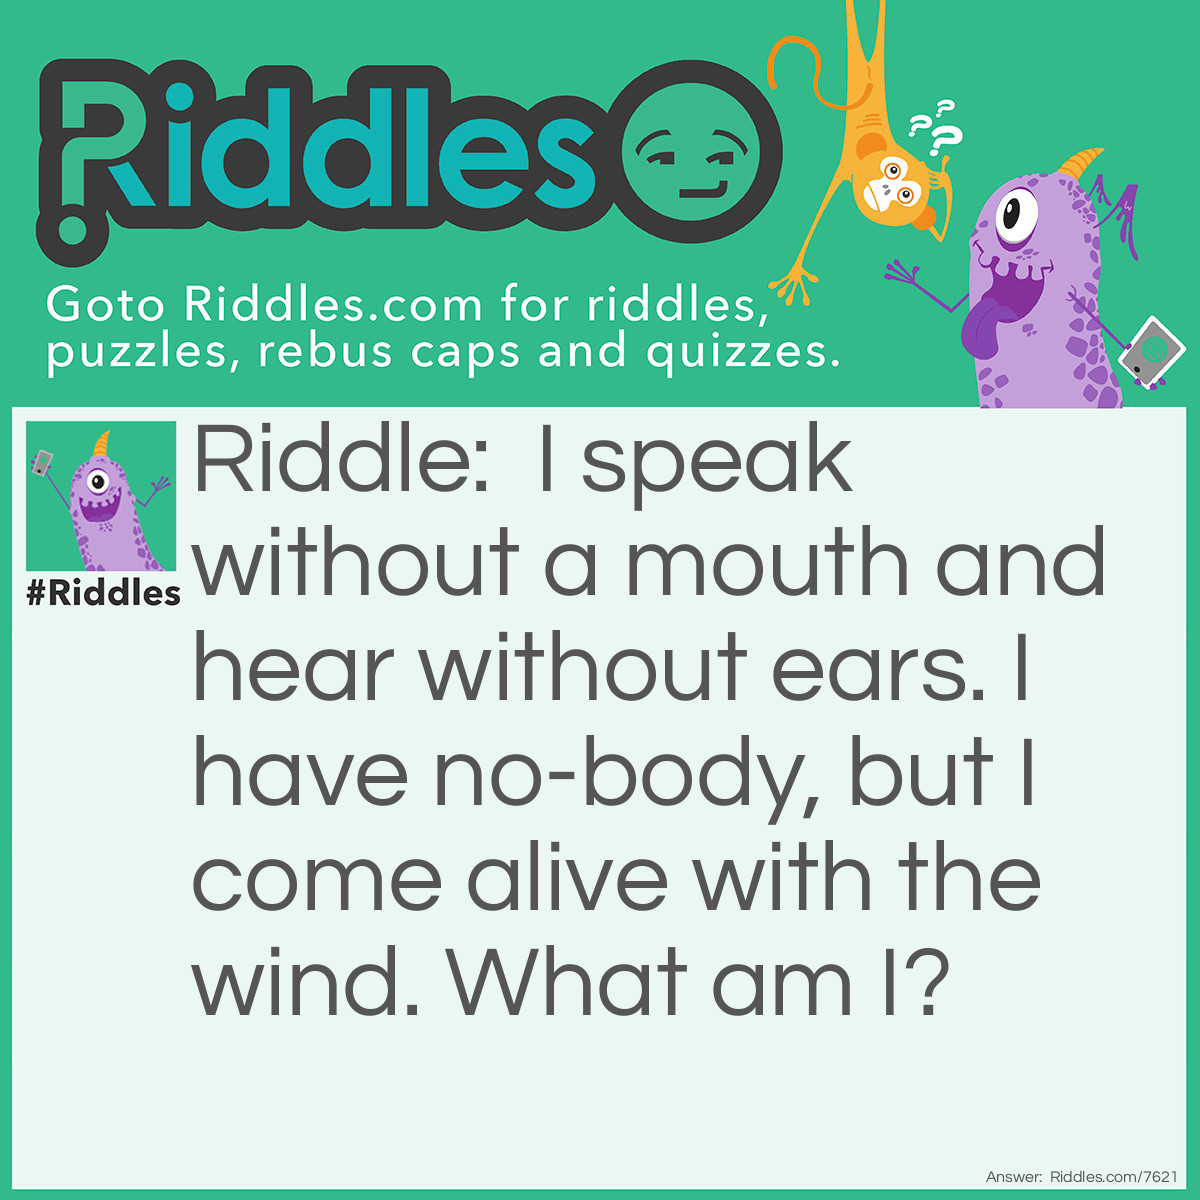 Riddle: I speak without a mouth and hear without ears. I have no-body, but I come alive with the wind. What am I? Answer: An echo!